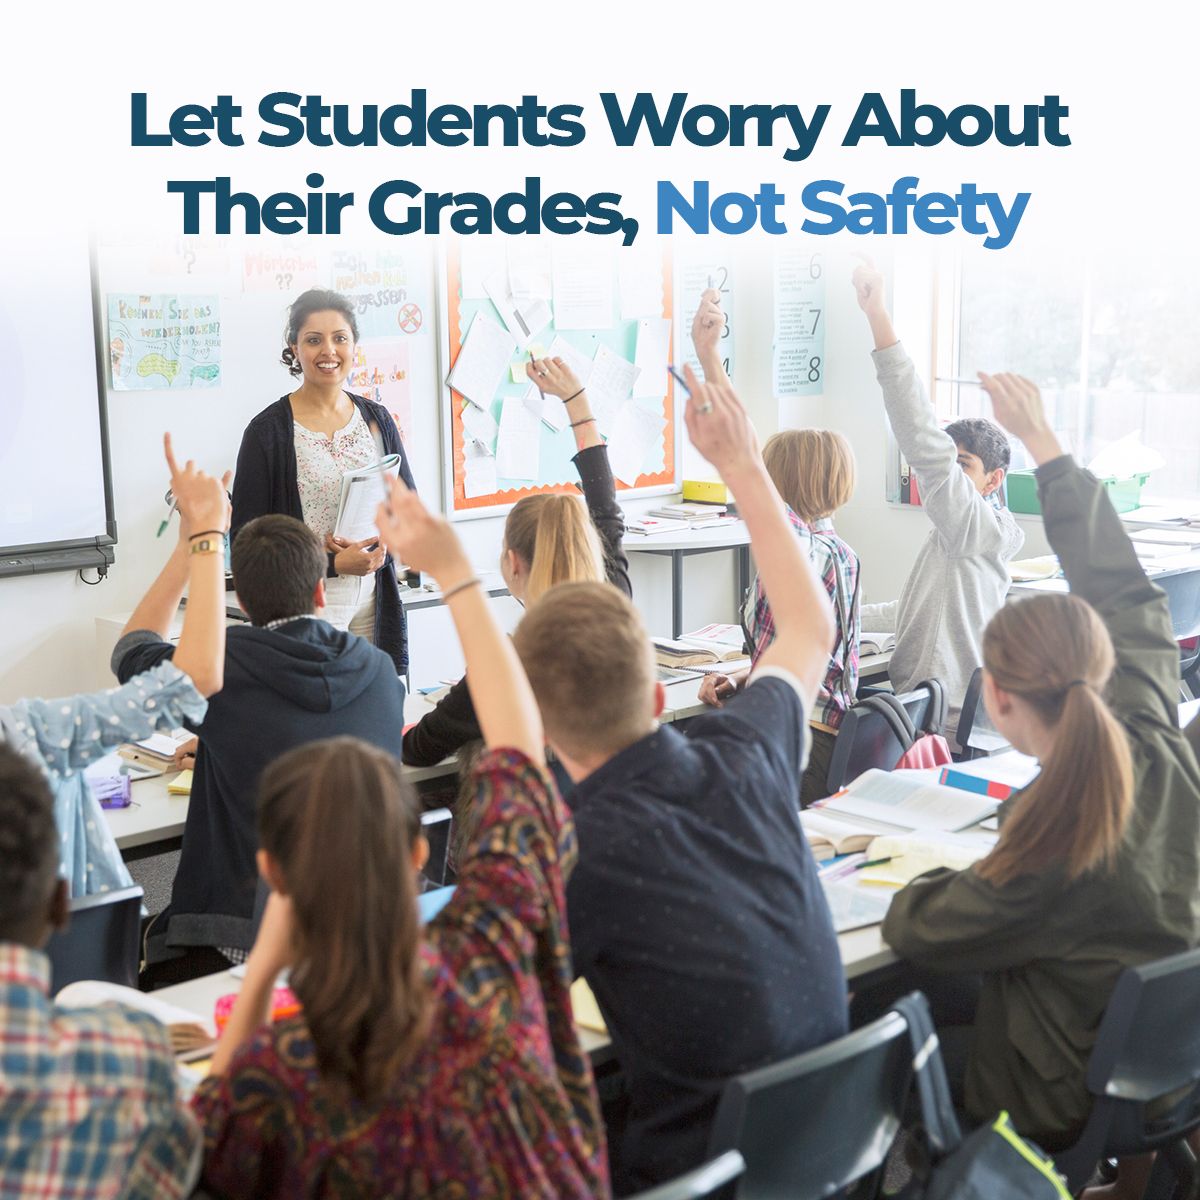 Let Students Worry About Their Grades, Not Safety